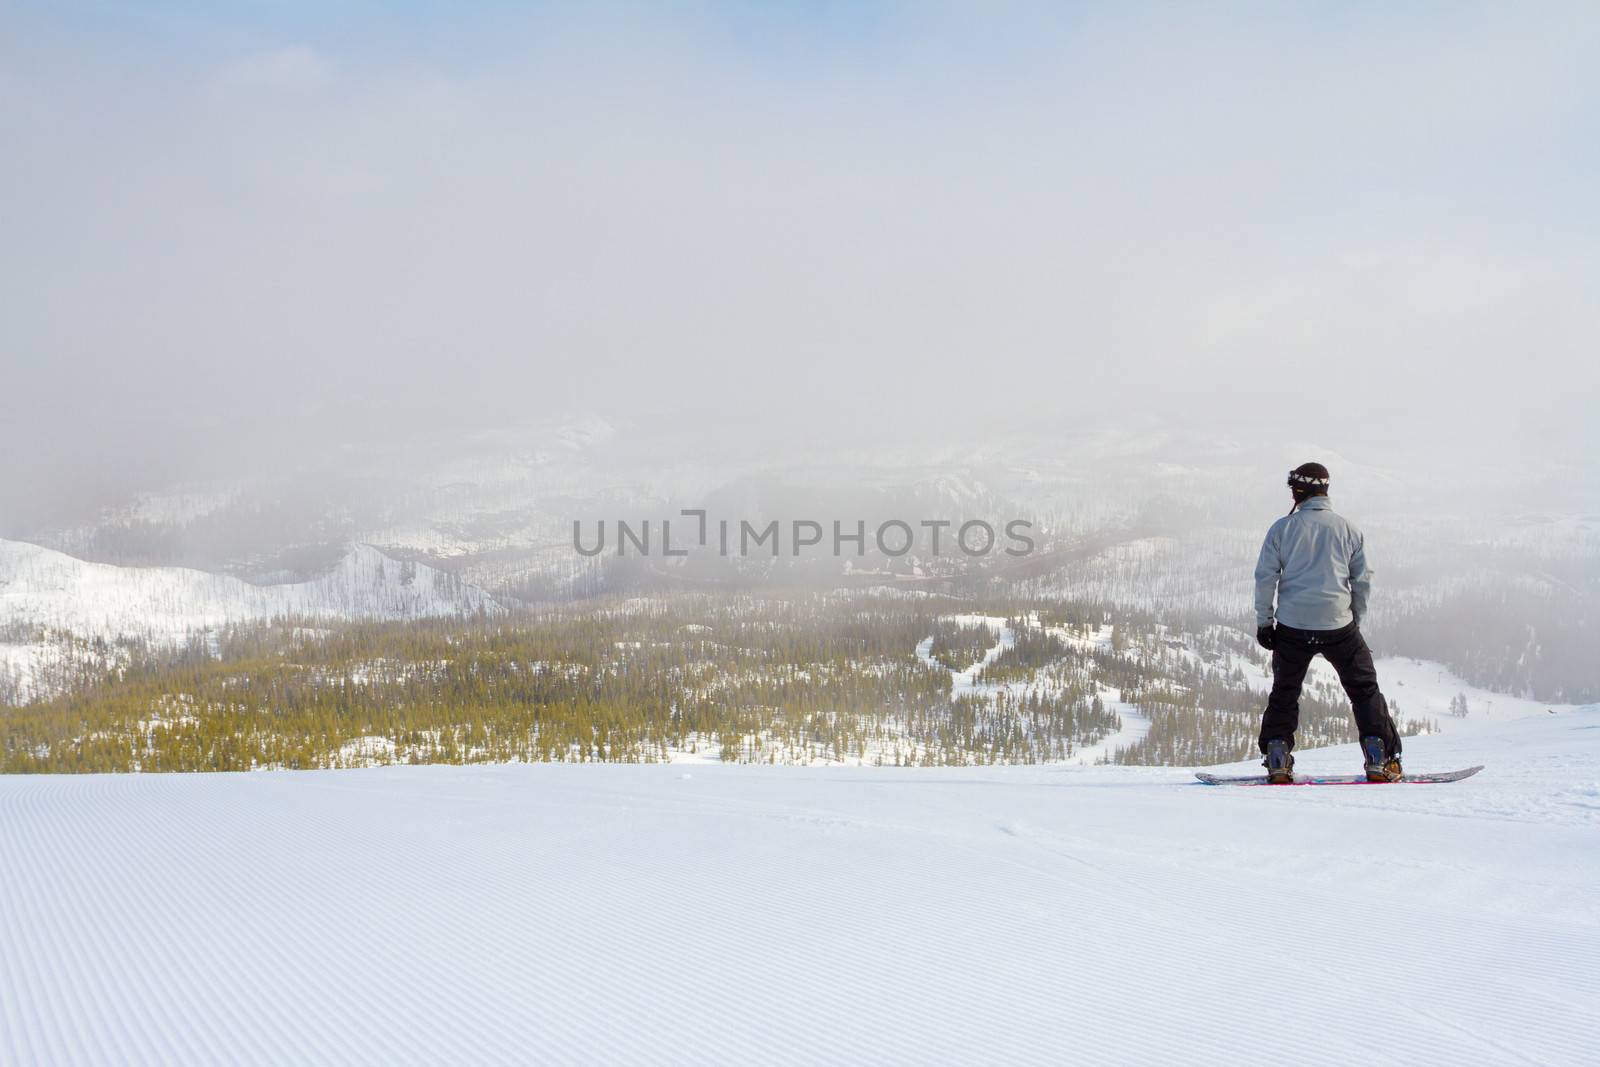 Snowboarder at Mountain Summit by joshuaraineyphotography